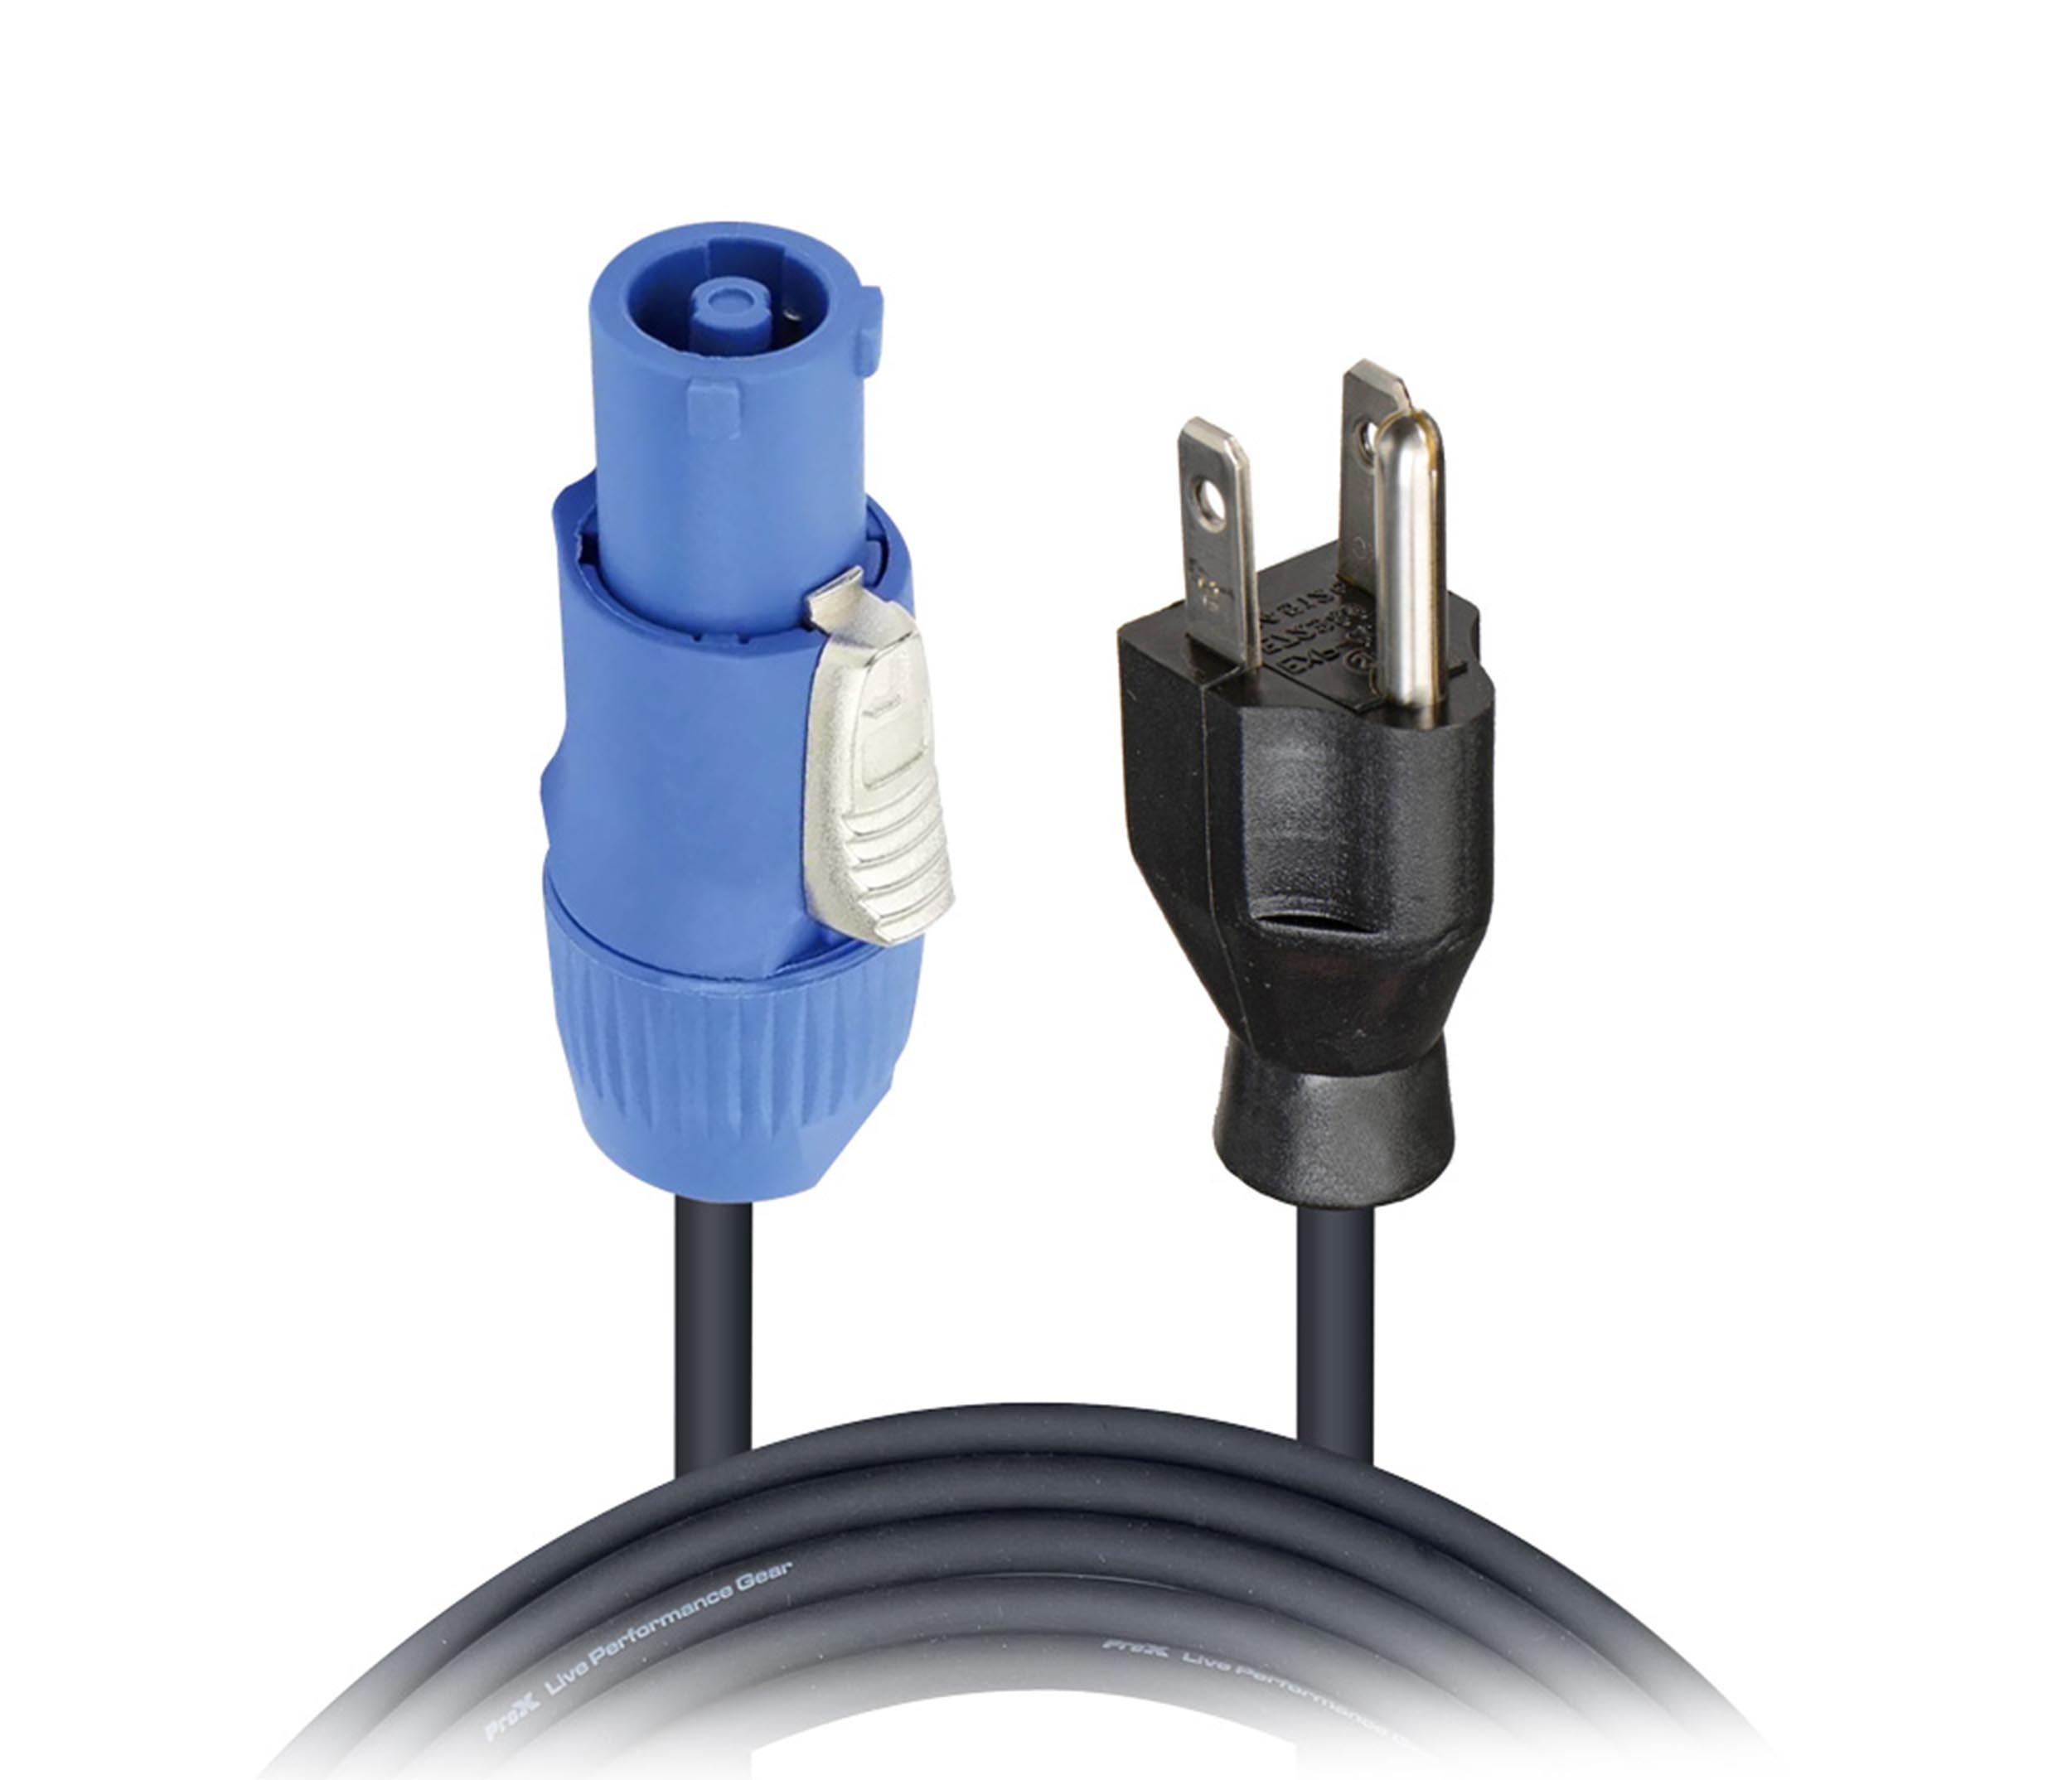 ProX XC-PWCE14-10, 14 AWG High Performance Power Cord NEMA 5-15 Edison to Blue Male for Powercon Compatible Devices - 10 Feet - Hollywood DJ